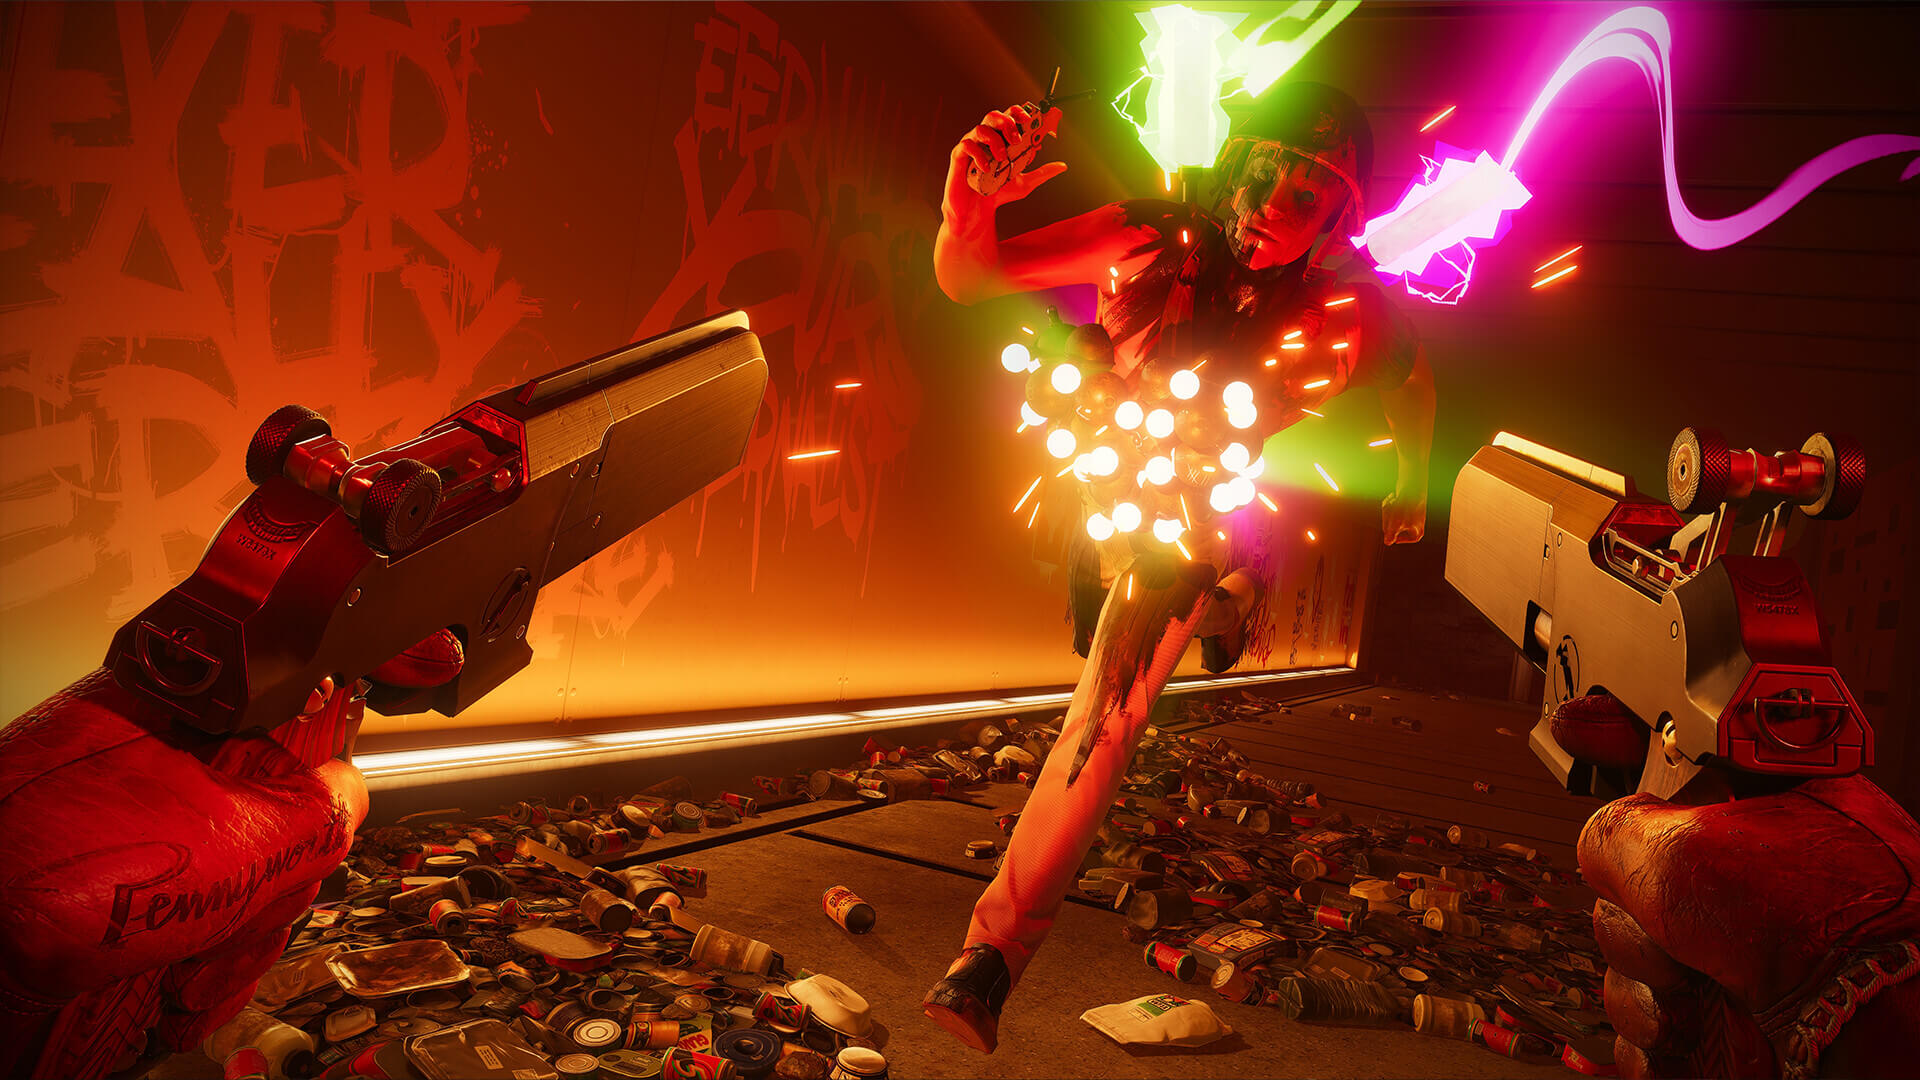 Deathloop screenshot shows a guy getting shot by another guy with two pistols.